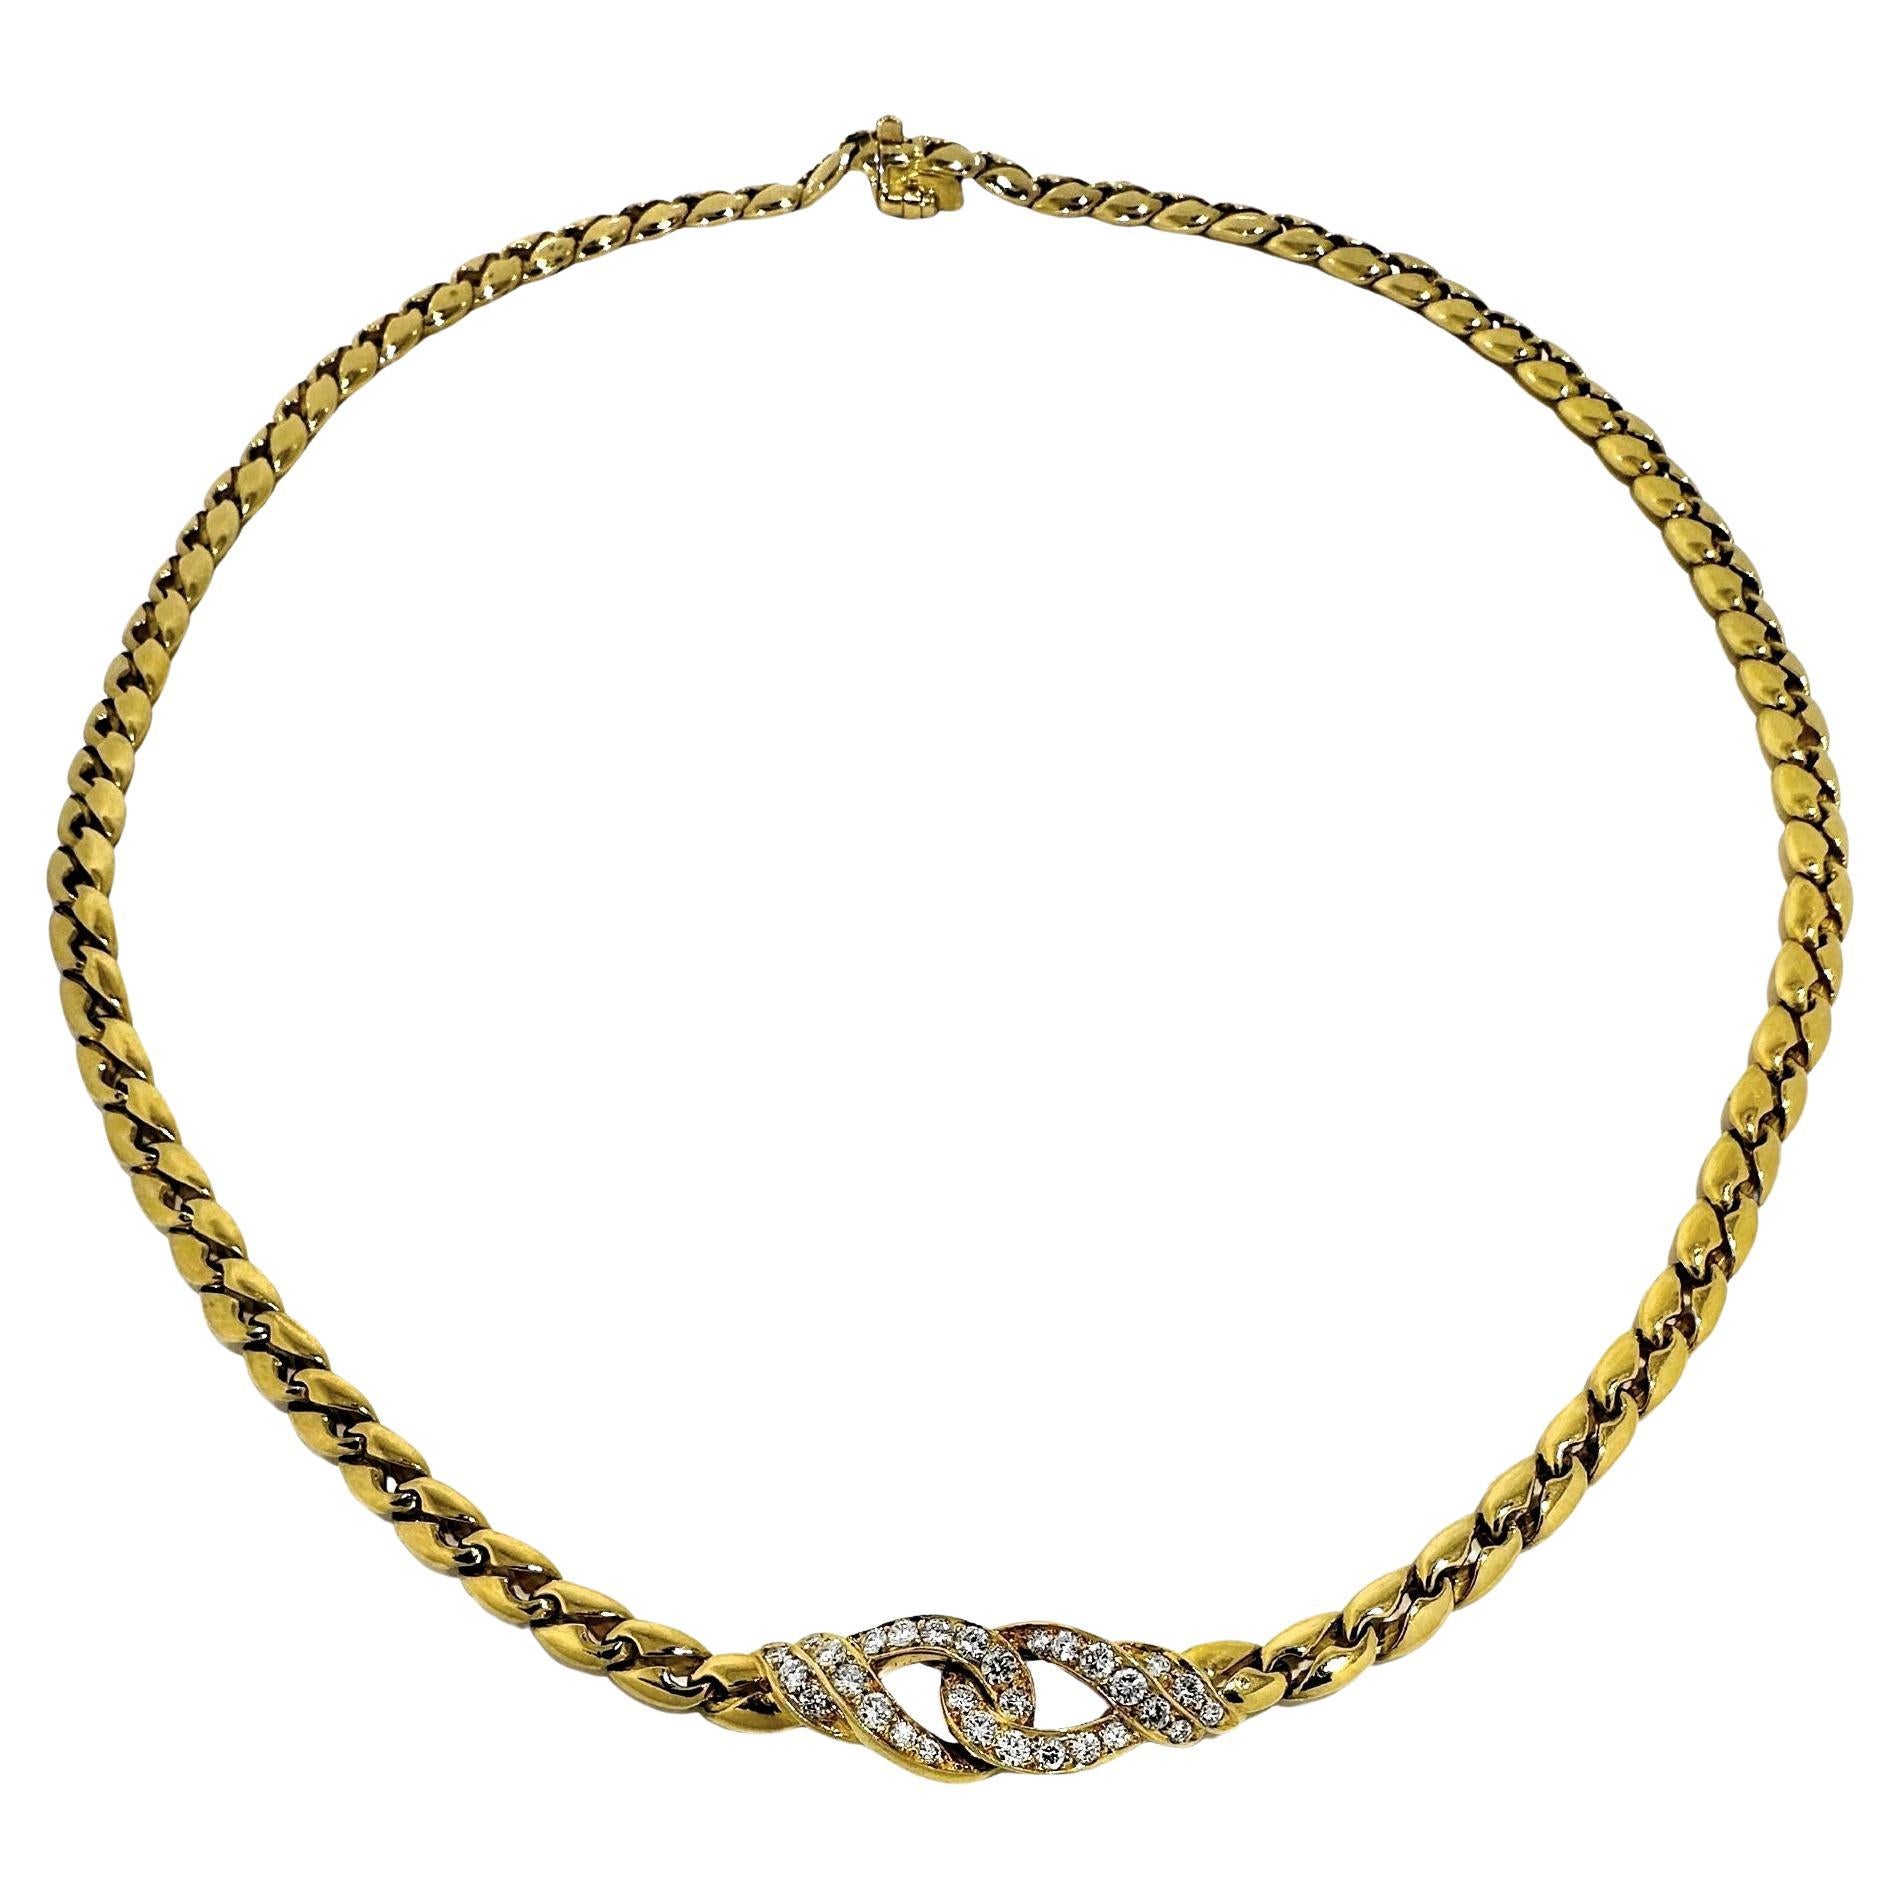 This lovely and elegant French Mauboussin choker necklace has, as it's central focus, a delicate love knot which is set with thirty brilliant cut diamonds having a total approximate weight of .85ct. Diamonds have an overall quality of G color and